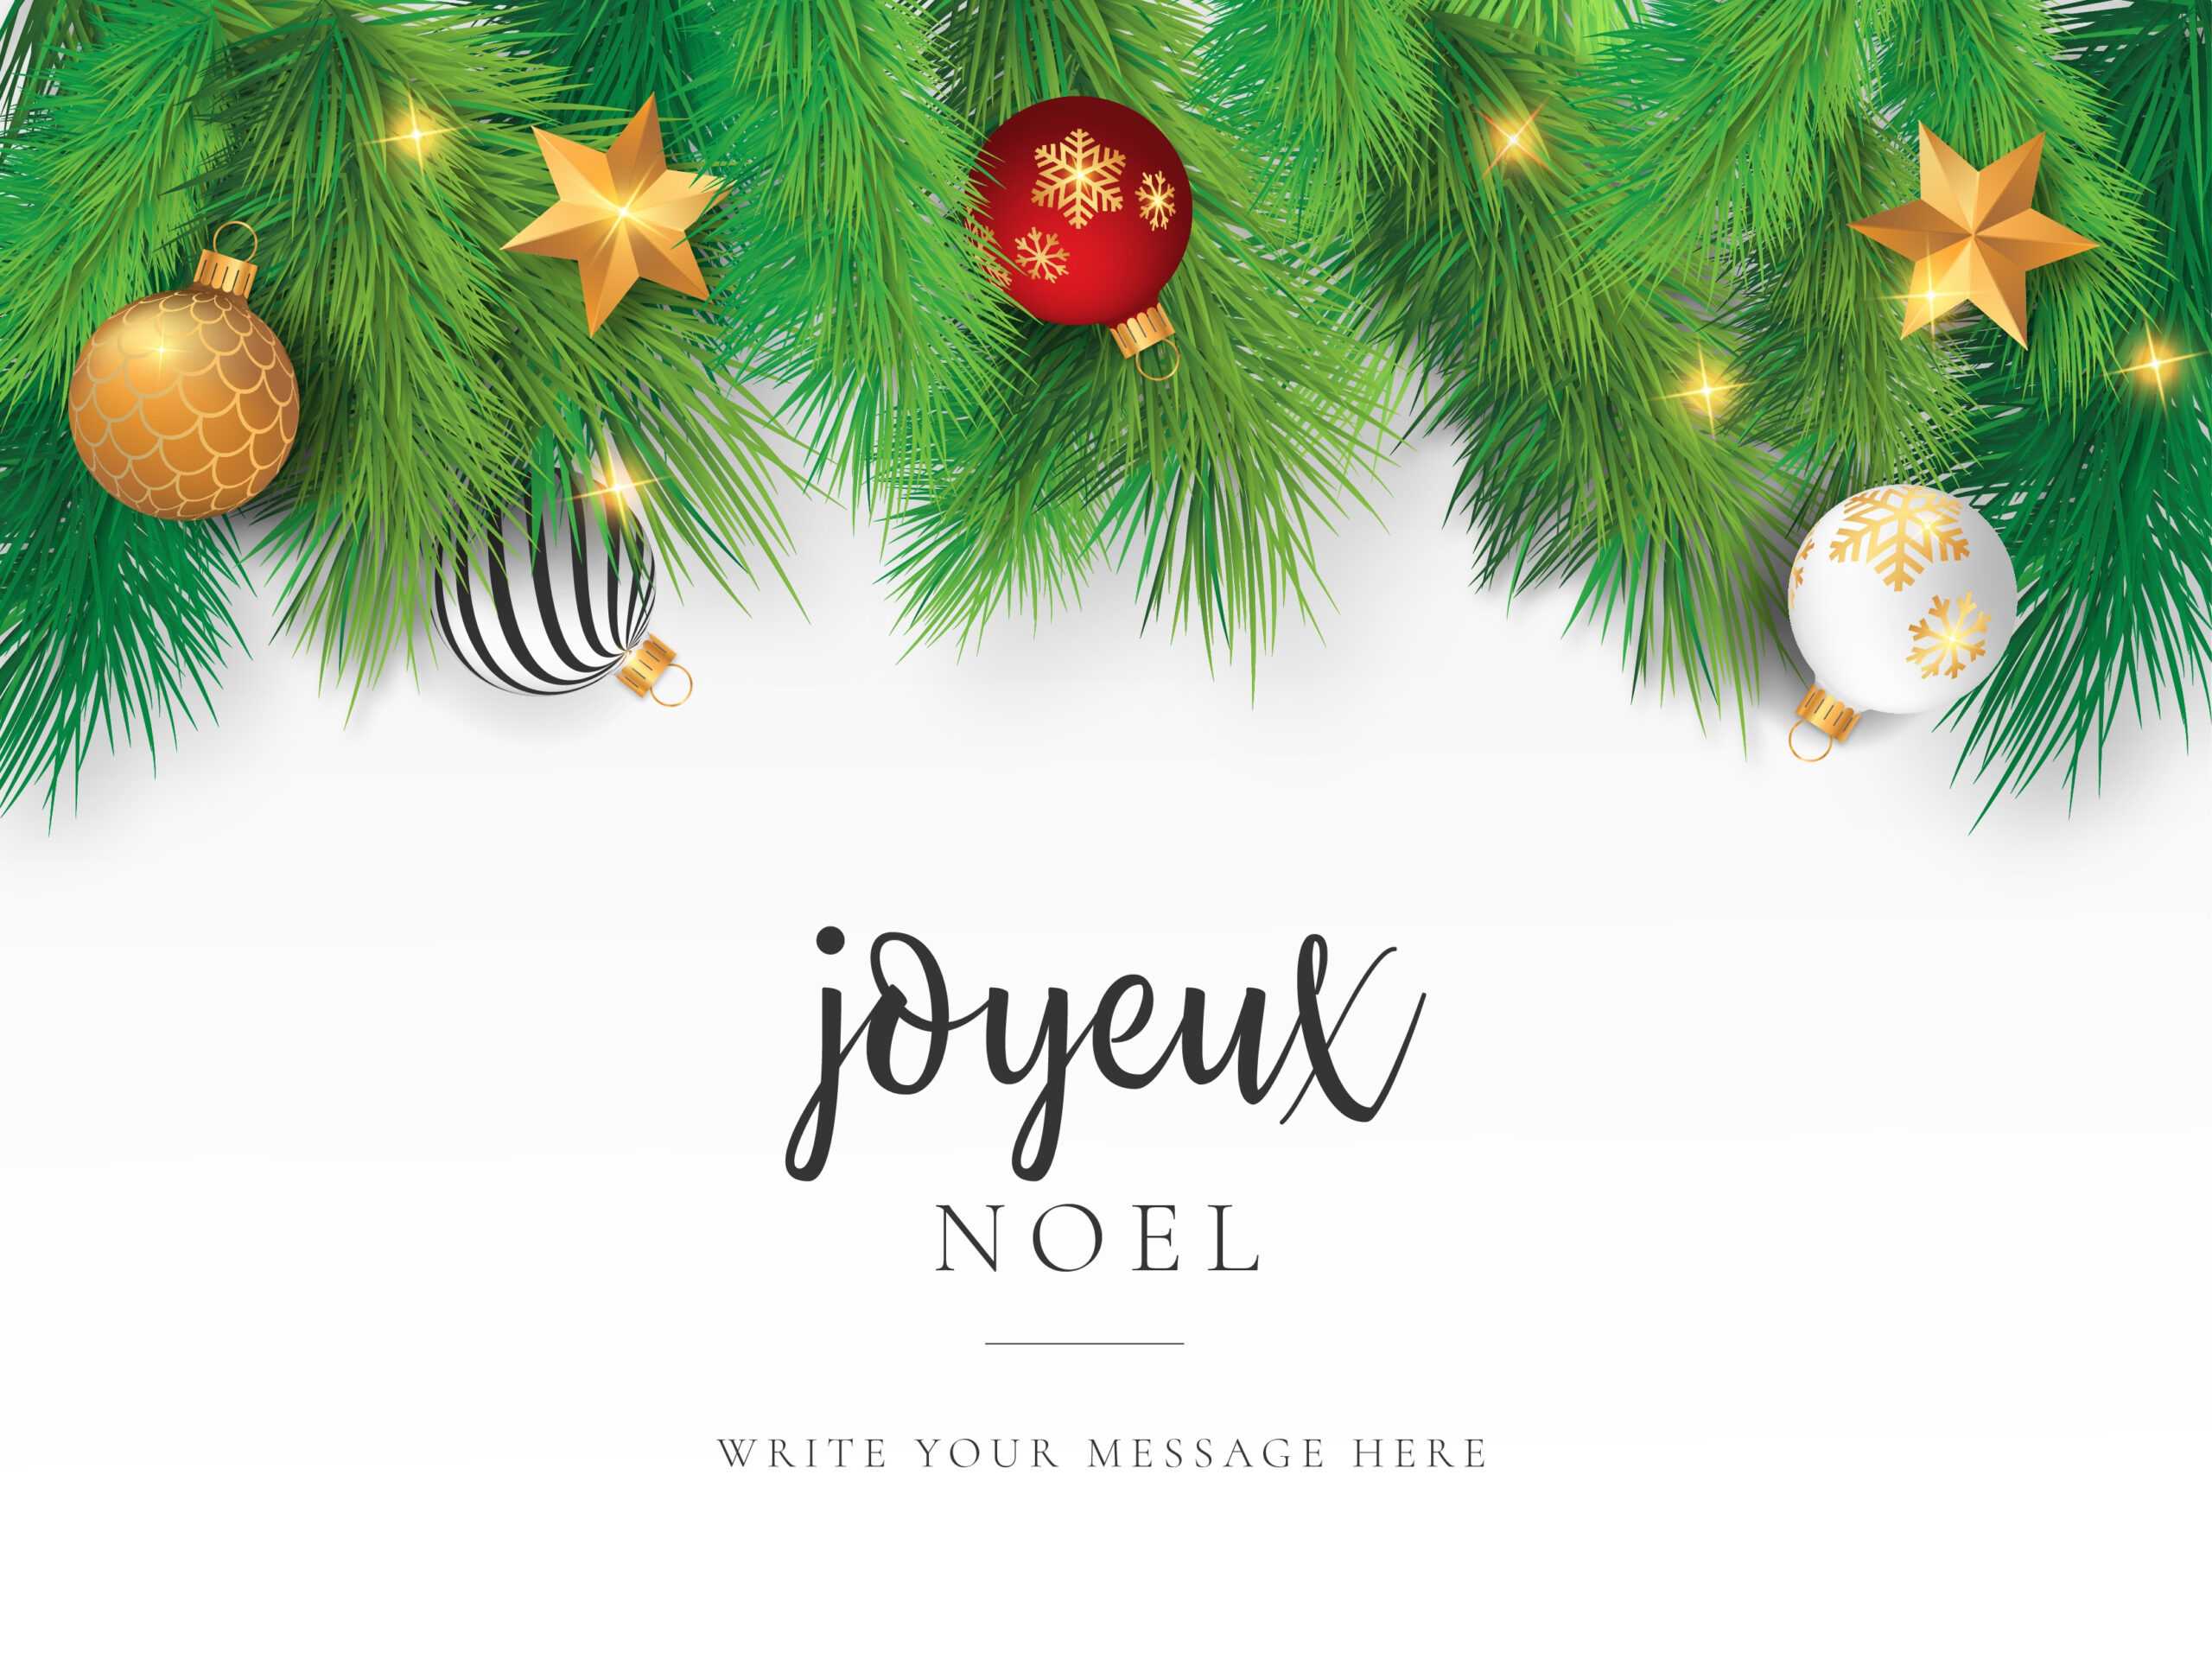 Christmas Card Template | Free Vector – Zonic Design Download With Regard To Christmas Photo Cards Templates Free Downloads